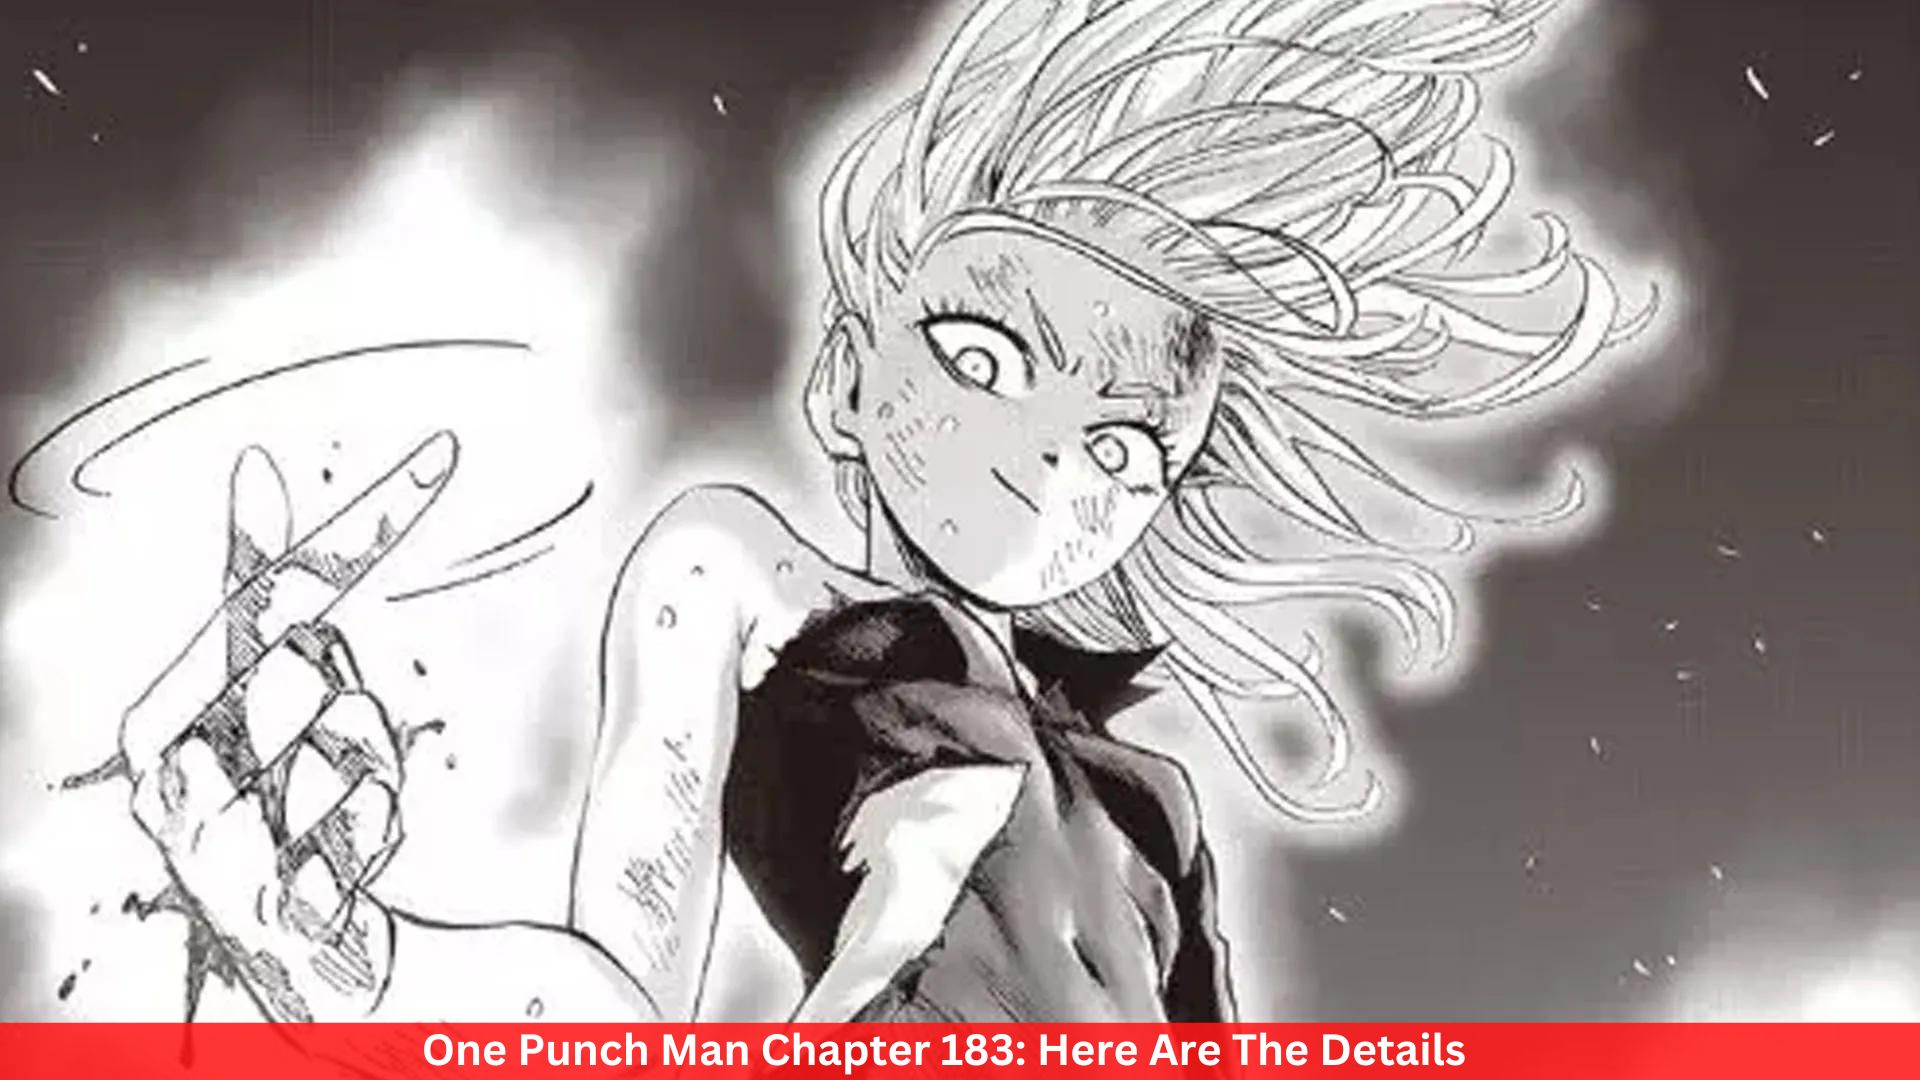 One Punch Man Chapter 183: Here Are The Details